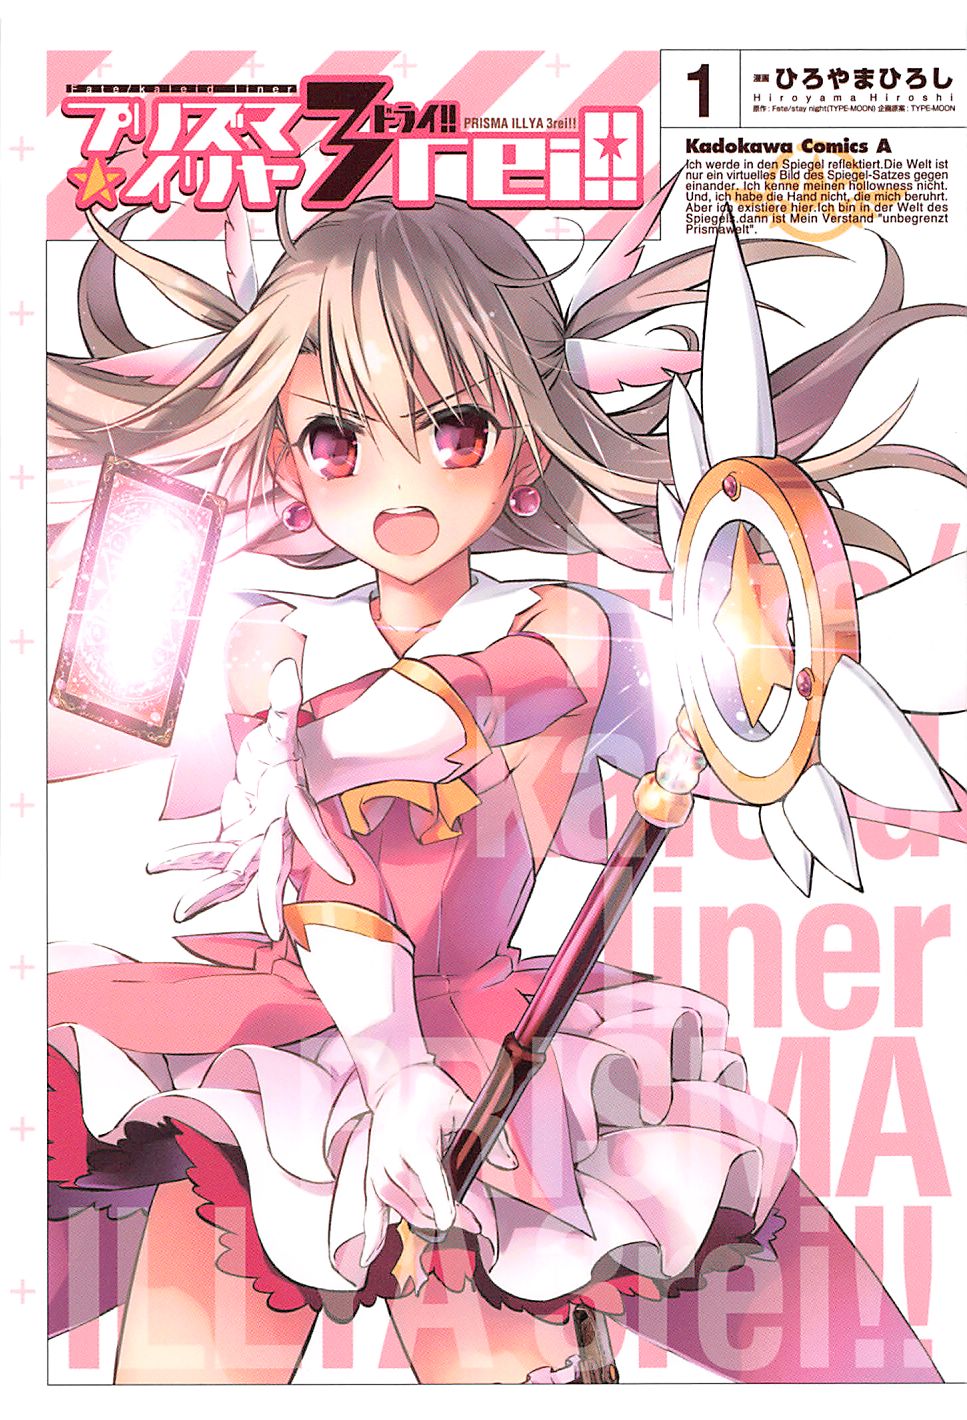 Fate/kaleid liner PRISMA☆ILLYA 3rei!! Vol. 1 Ch. 1 A City Submerged in Silver